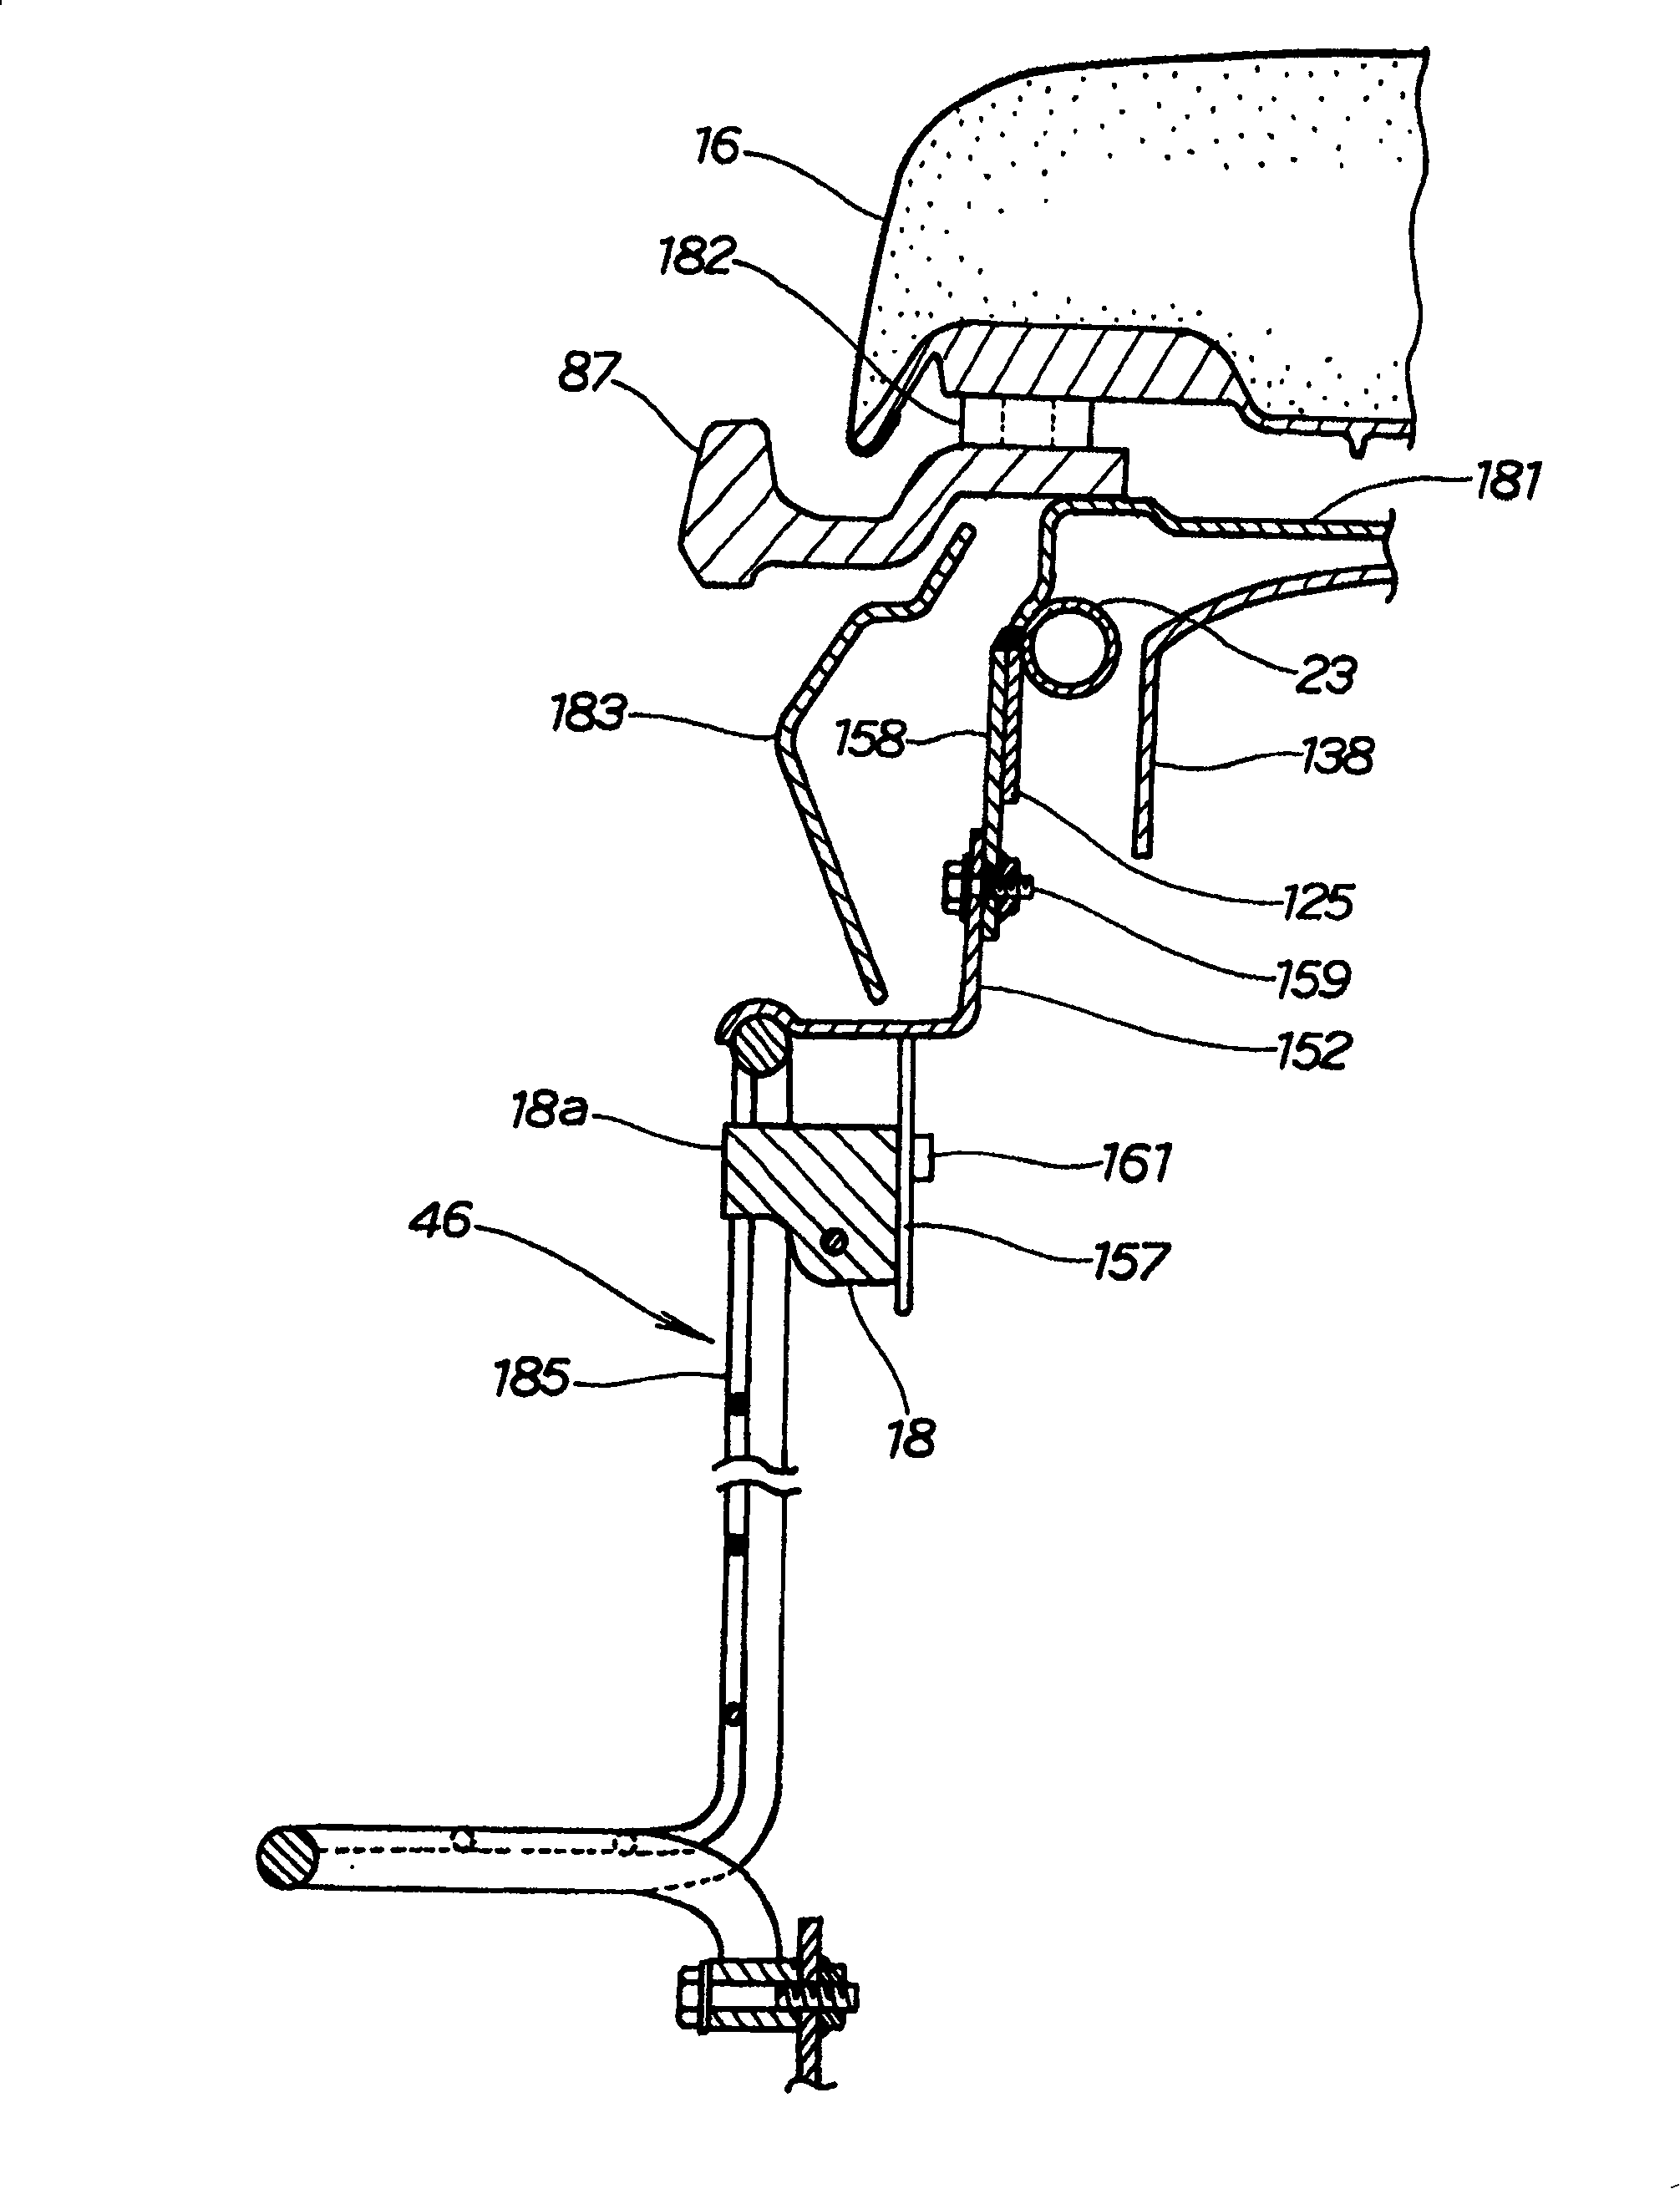 Mounting structure for helmet holder of two-wheeled automobile